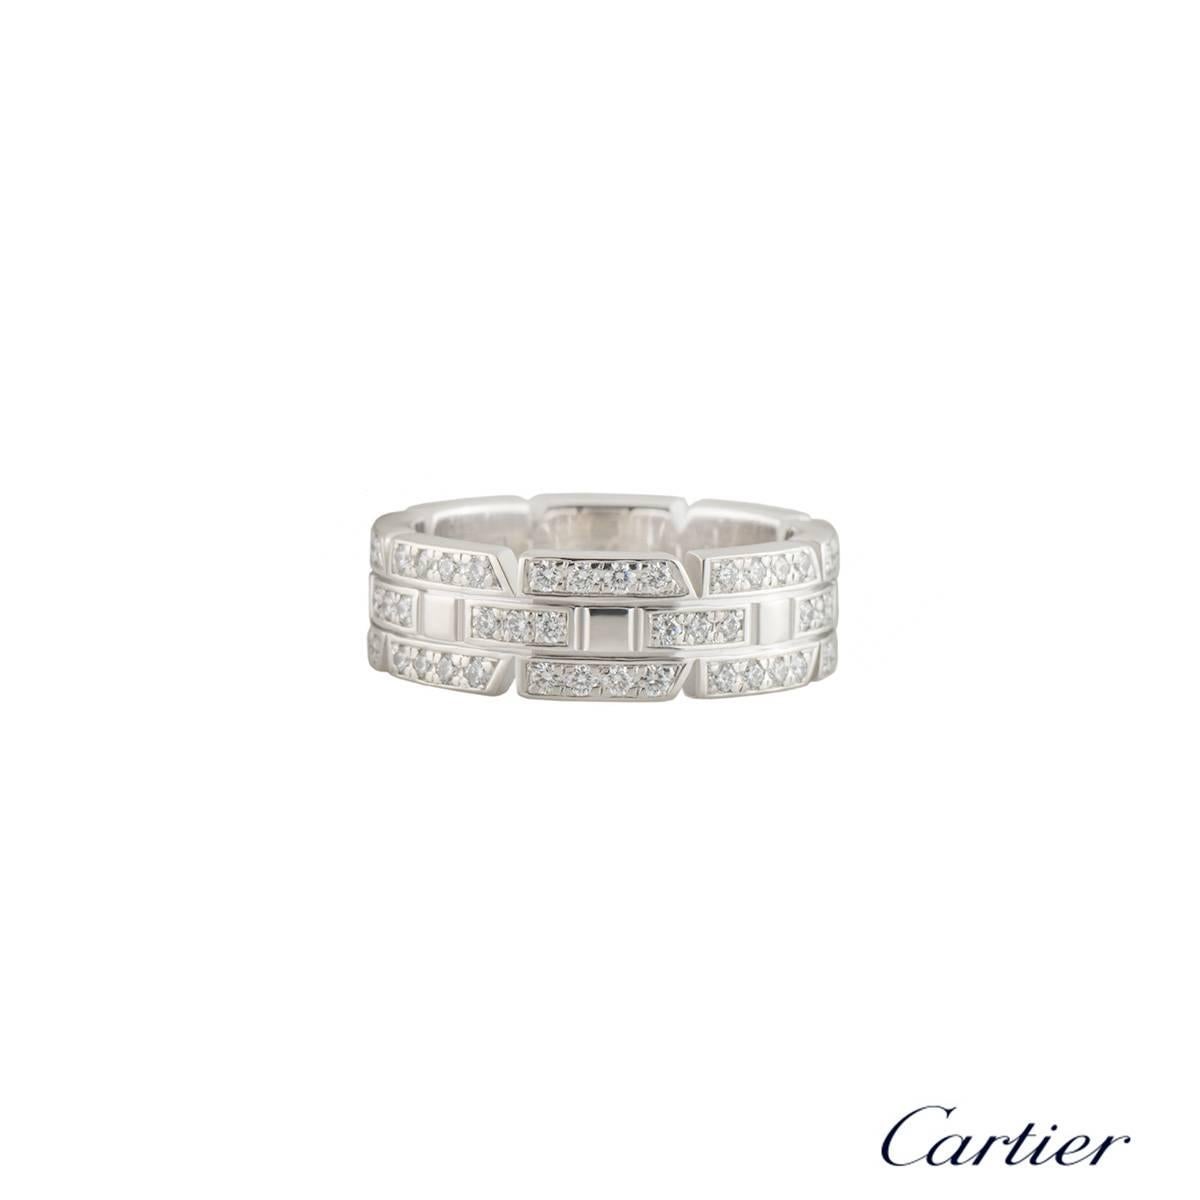 A beautiful 18k white gold diamond Cartier Francaise ring from the Links and Chain collection. The ring is composed of the iconic triple row of brick work motifs throughout with round brilliant cut diamonds. The diamonds have a total weight of